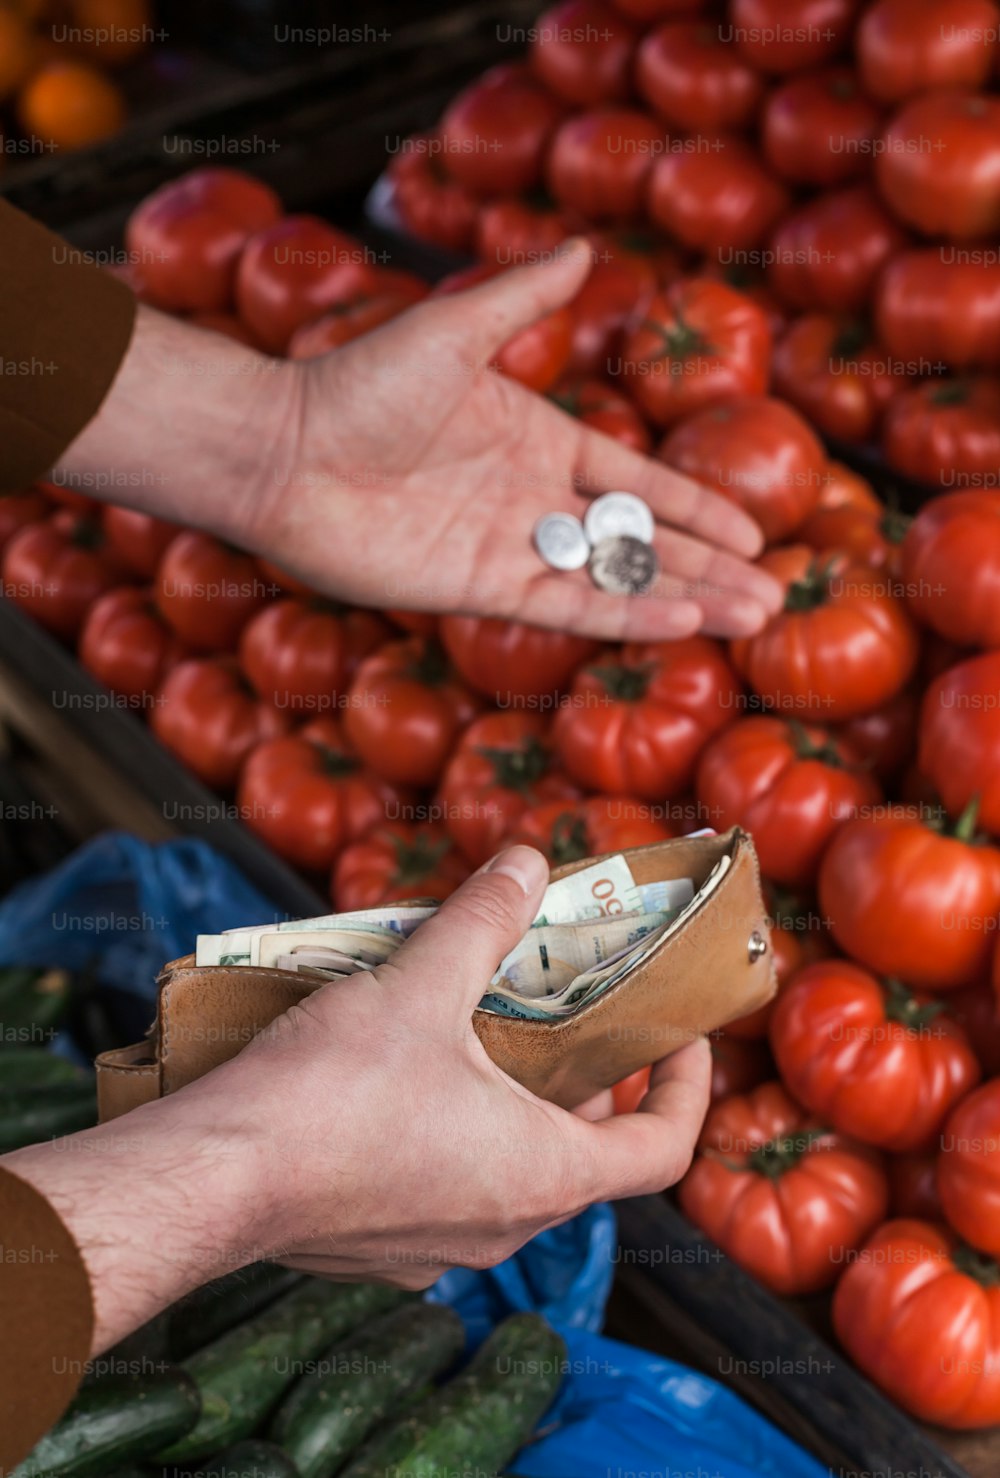 a person holding a wallet in front of a pile of tomatoes and cucumbers